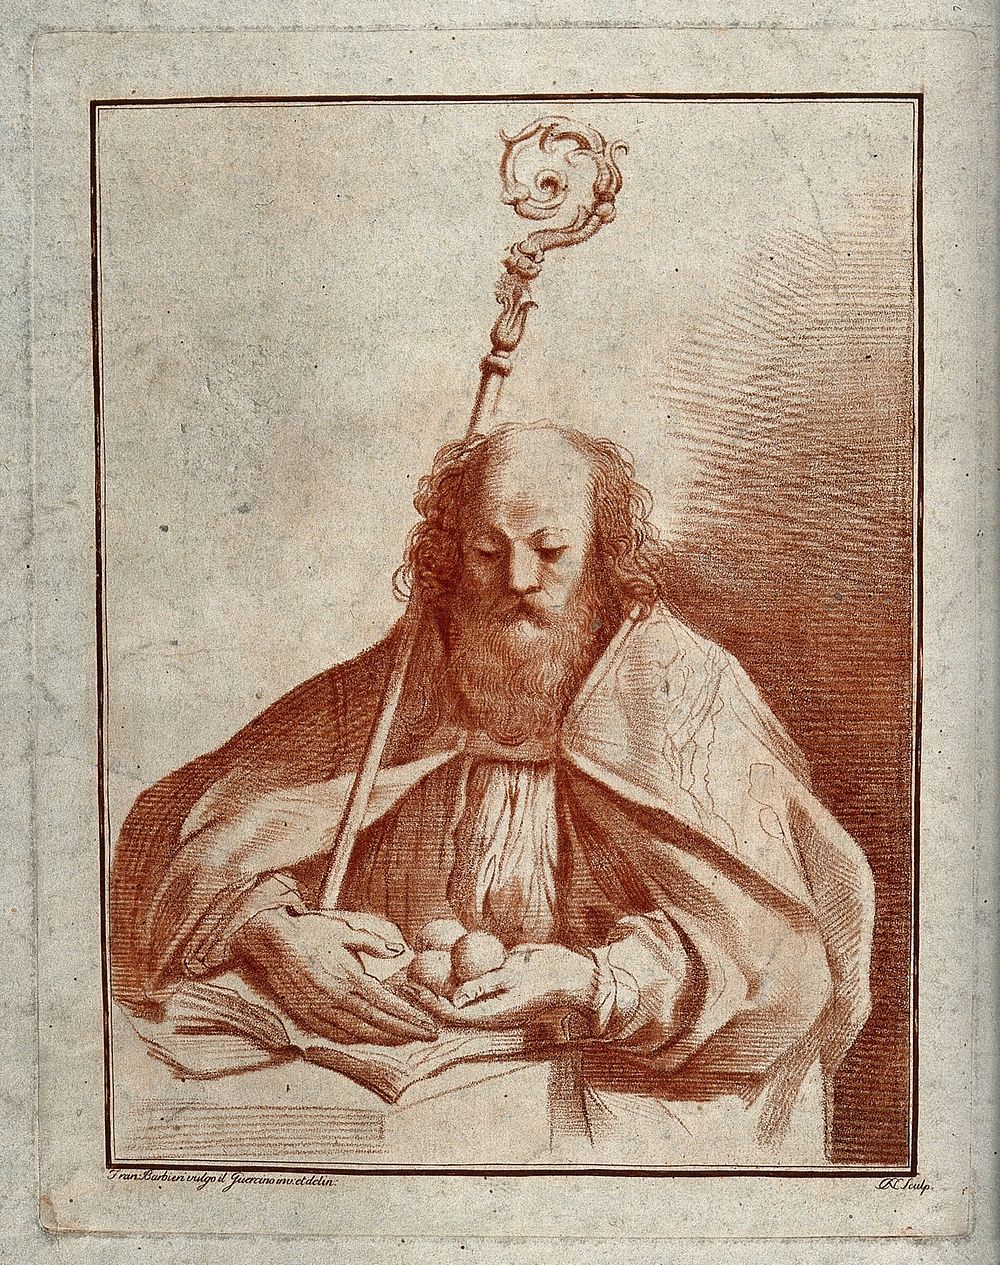 Saint Nicholas of Myra and Bari. Chalk manner engraving by Clemente Nicoli, 1786, after G.F. Barbieri, il Guercino.